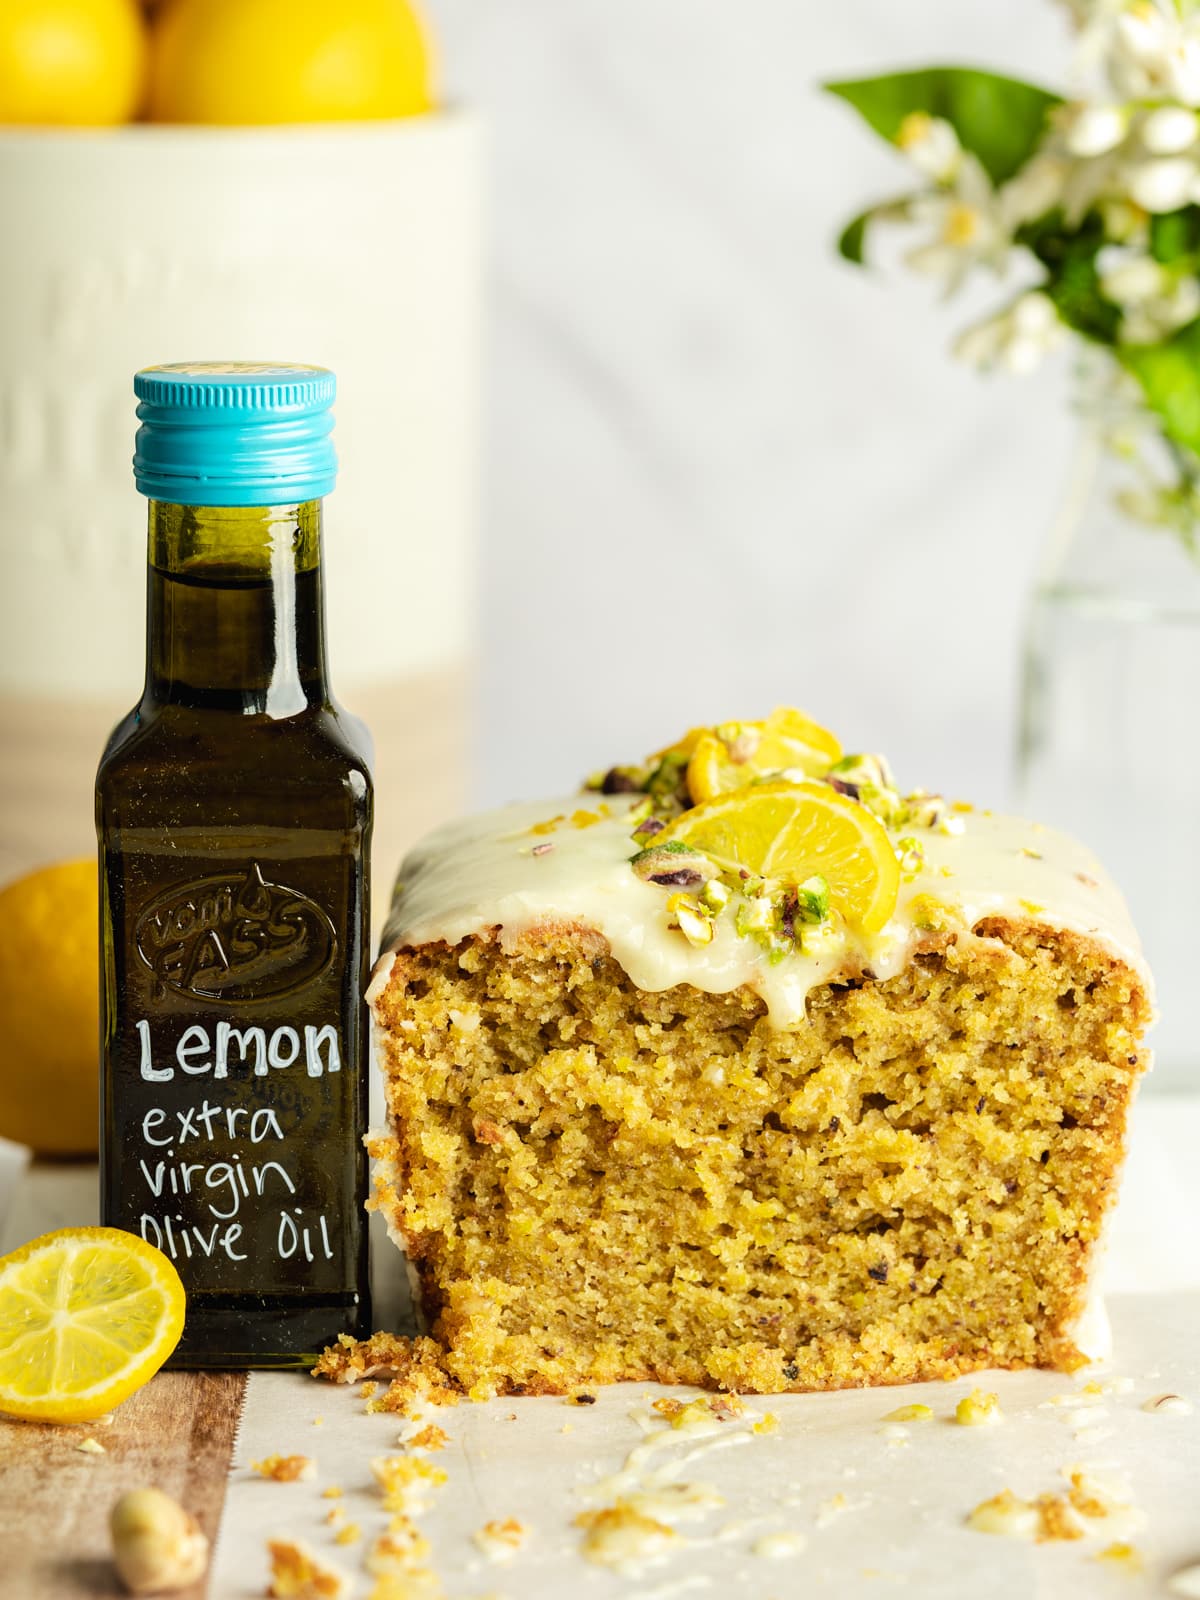 a lemon pistachio loaf with cream cheesecake glaze sliced open on a cutting board next to a small bottle of lemon extra virgin olive oil.